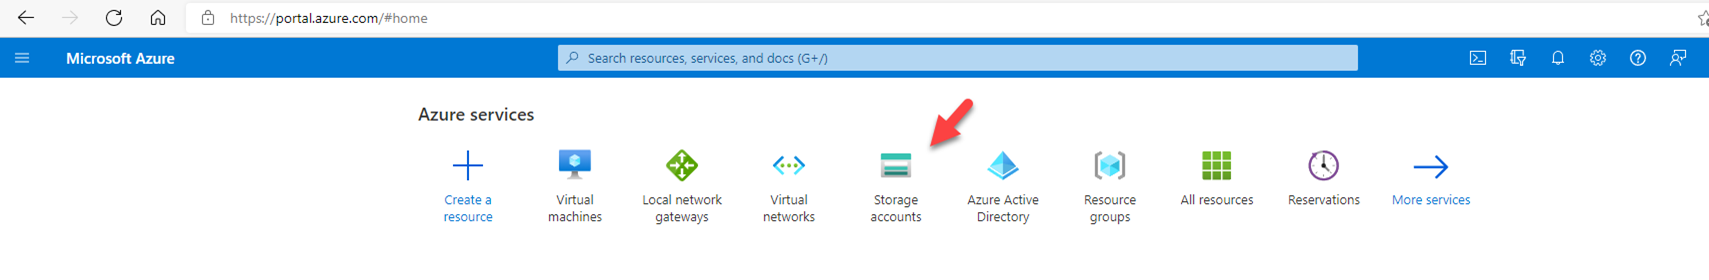 120721 1658 HowtouseVee1 - How to use Veeam to Restore On-Premises VM to Azure